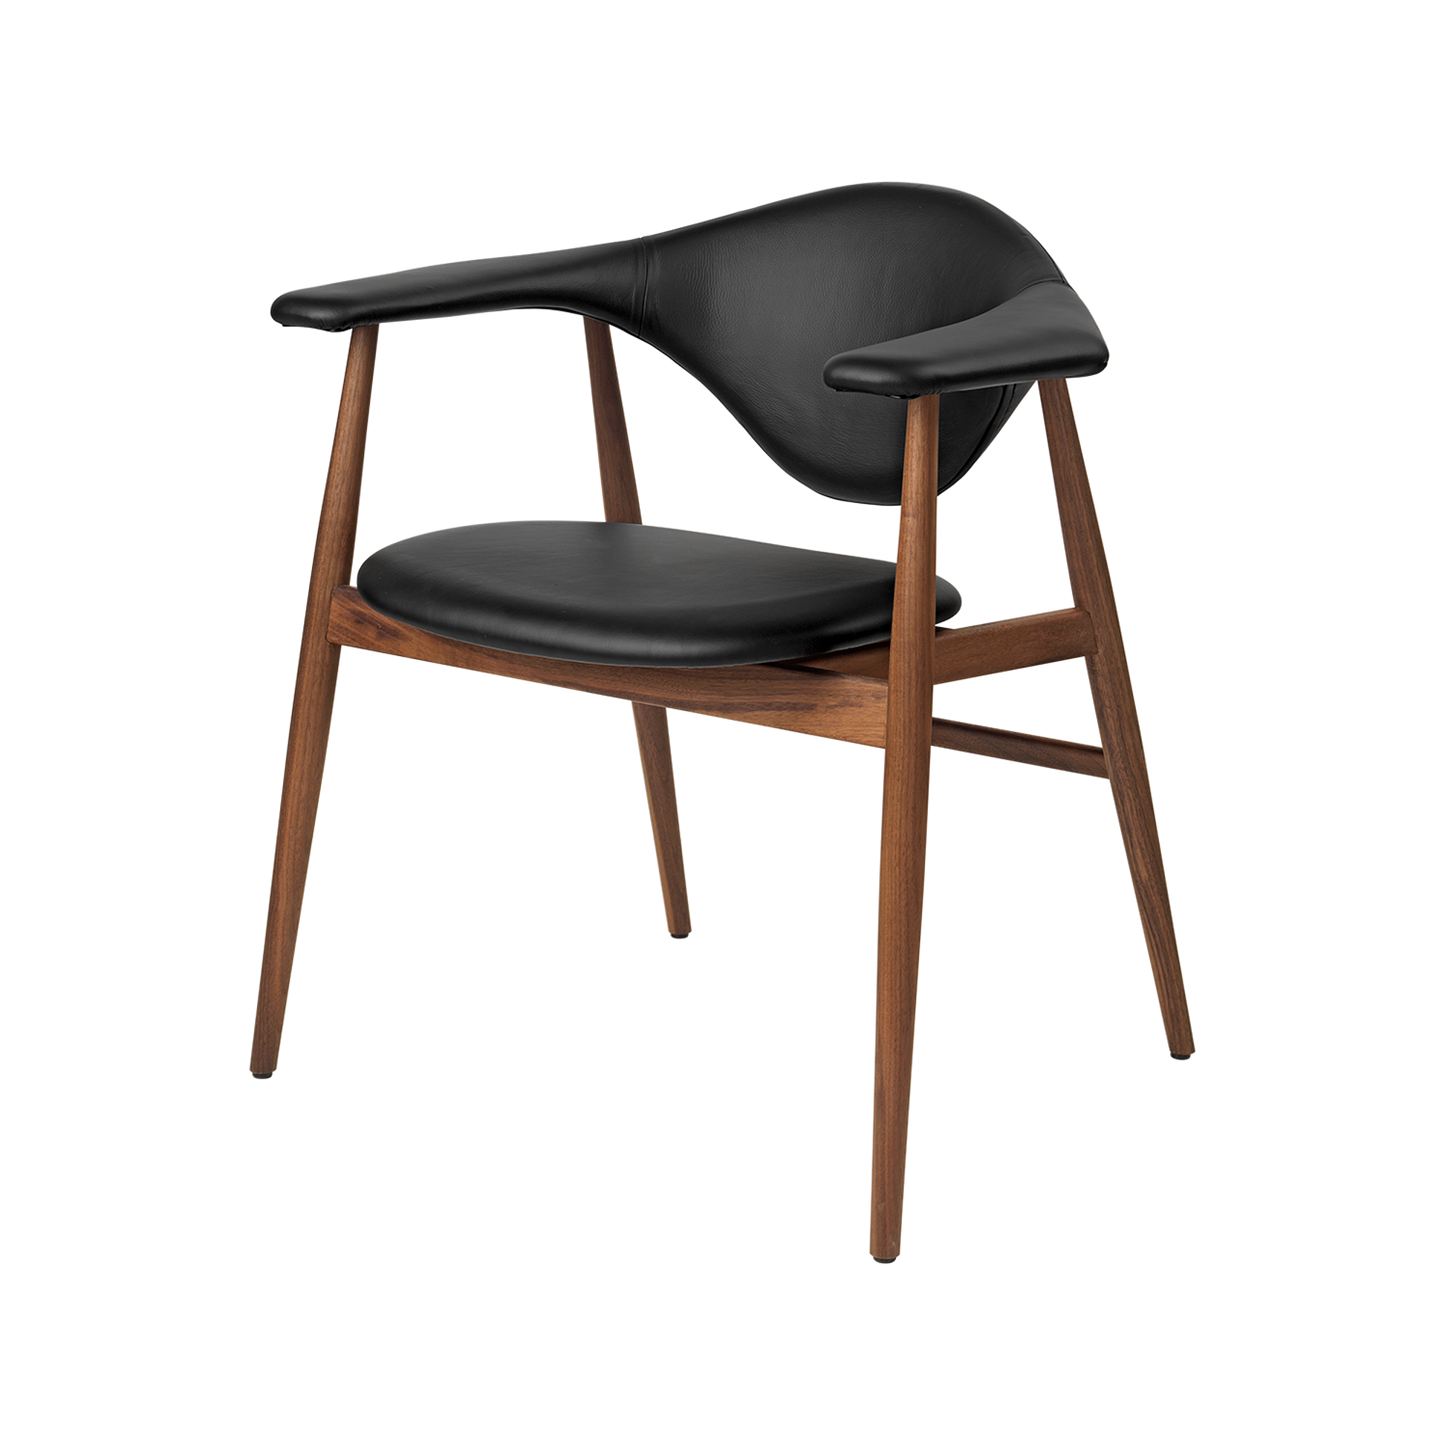 Masculo Dining Chair Upholstered by GUBI #Leather with Legs in Walnut